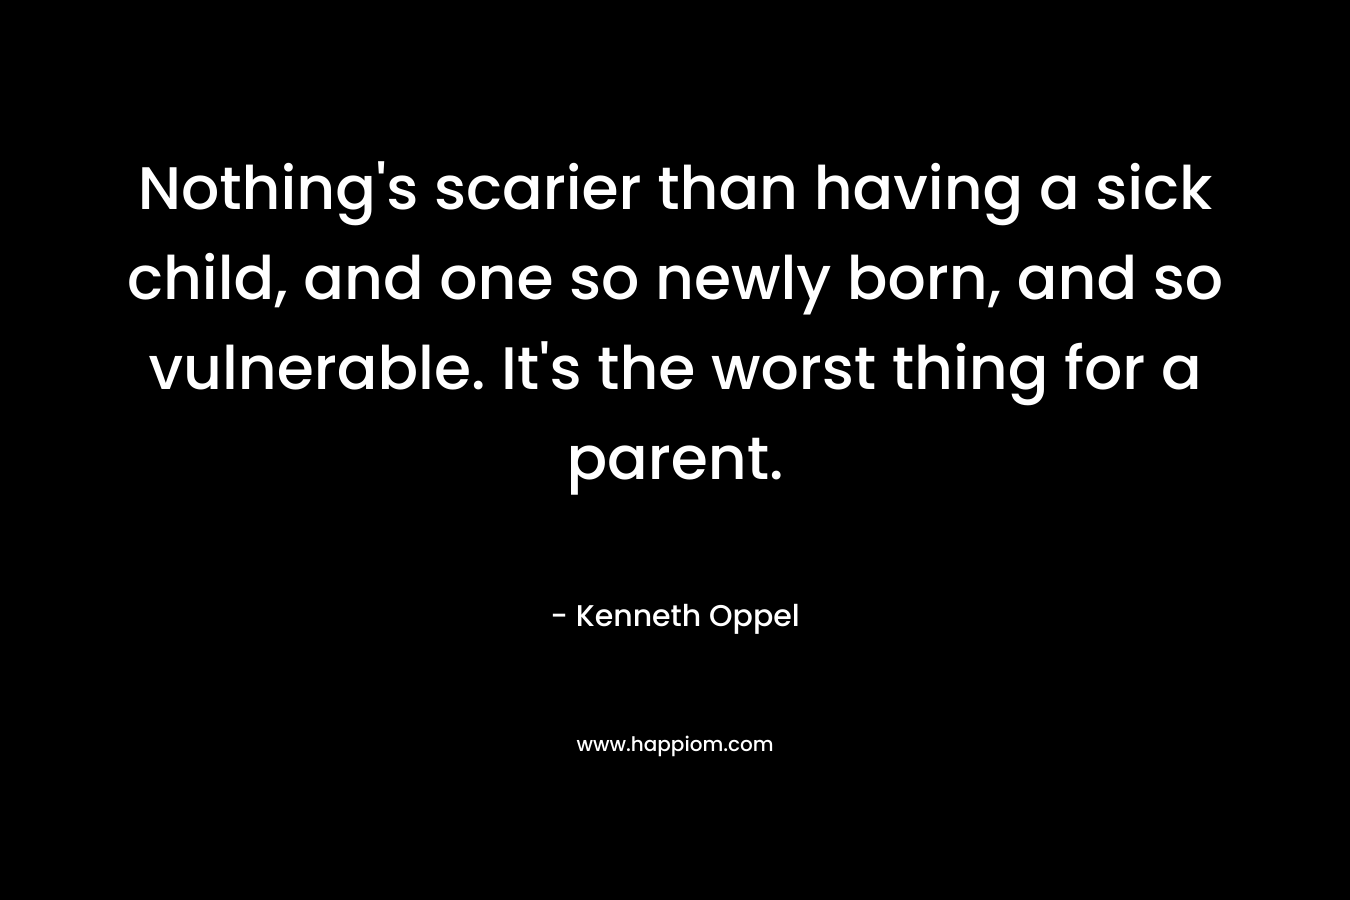 Nothing’s scarier than having a sick child, and one so newly born, and so vulnerable. It’s the worst thing for a parent. – Kenneth Oppel